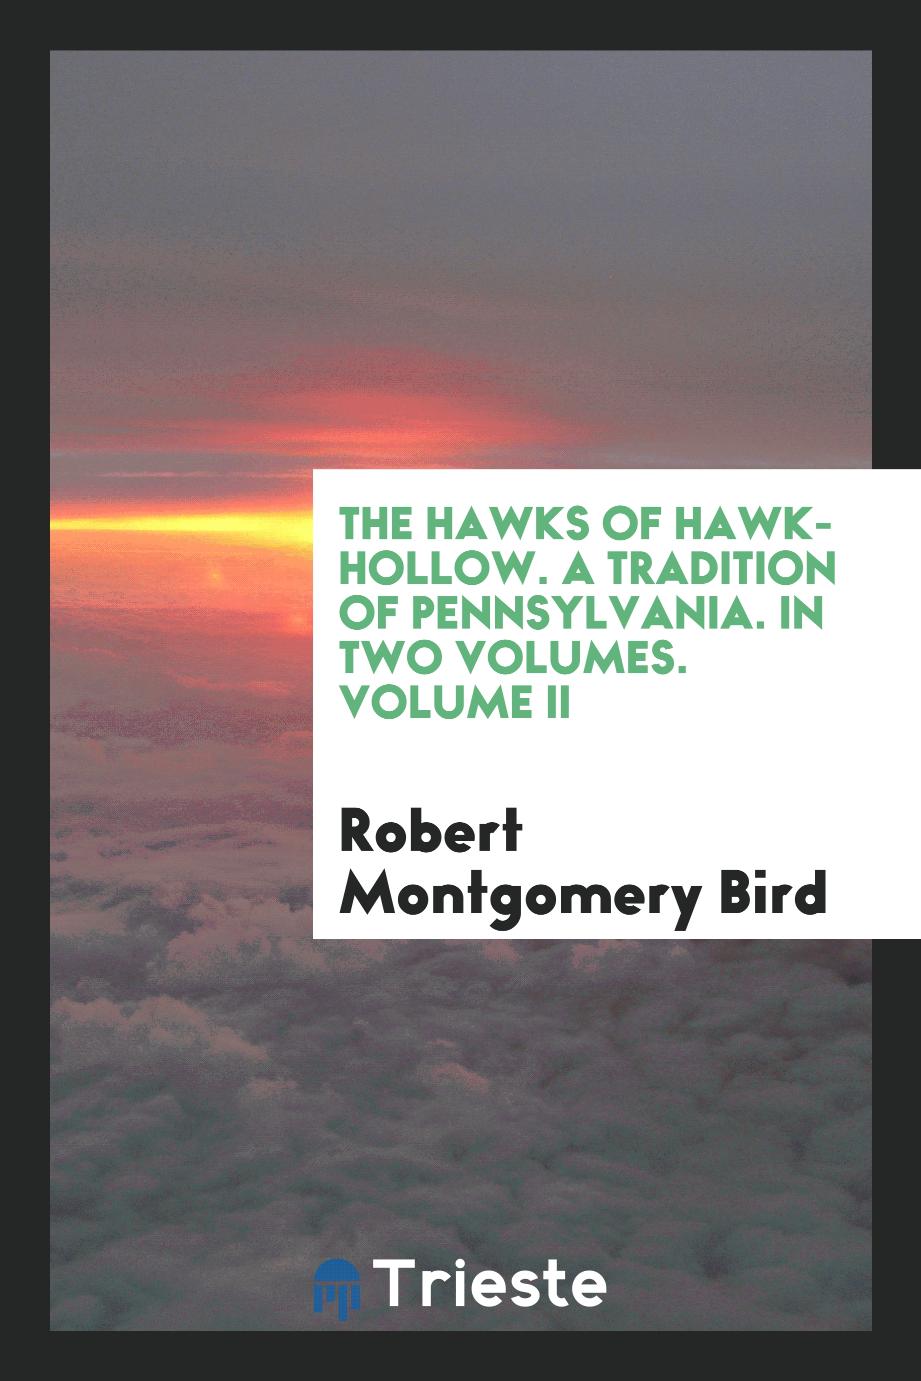 The hawks of Hawk-hollow. A tradition of Pennsylvania. In two volumes. Volume II